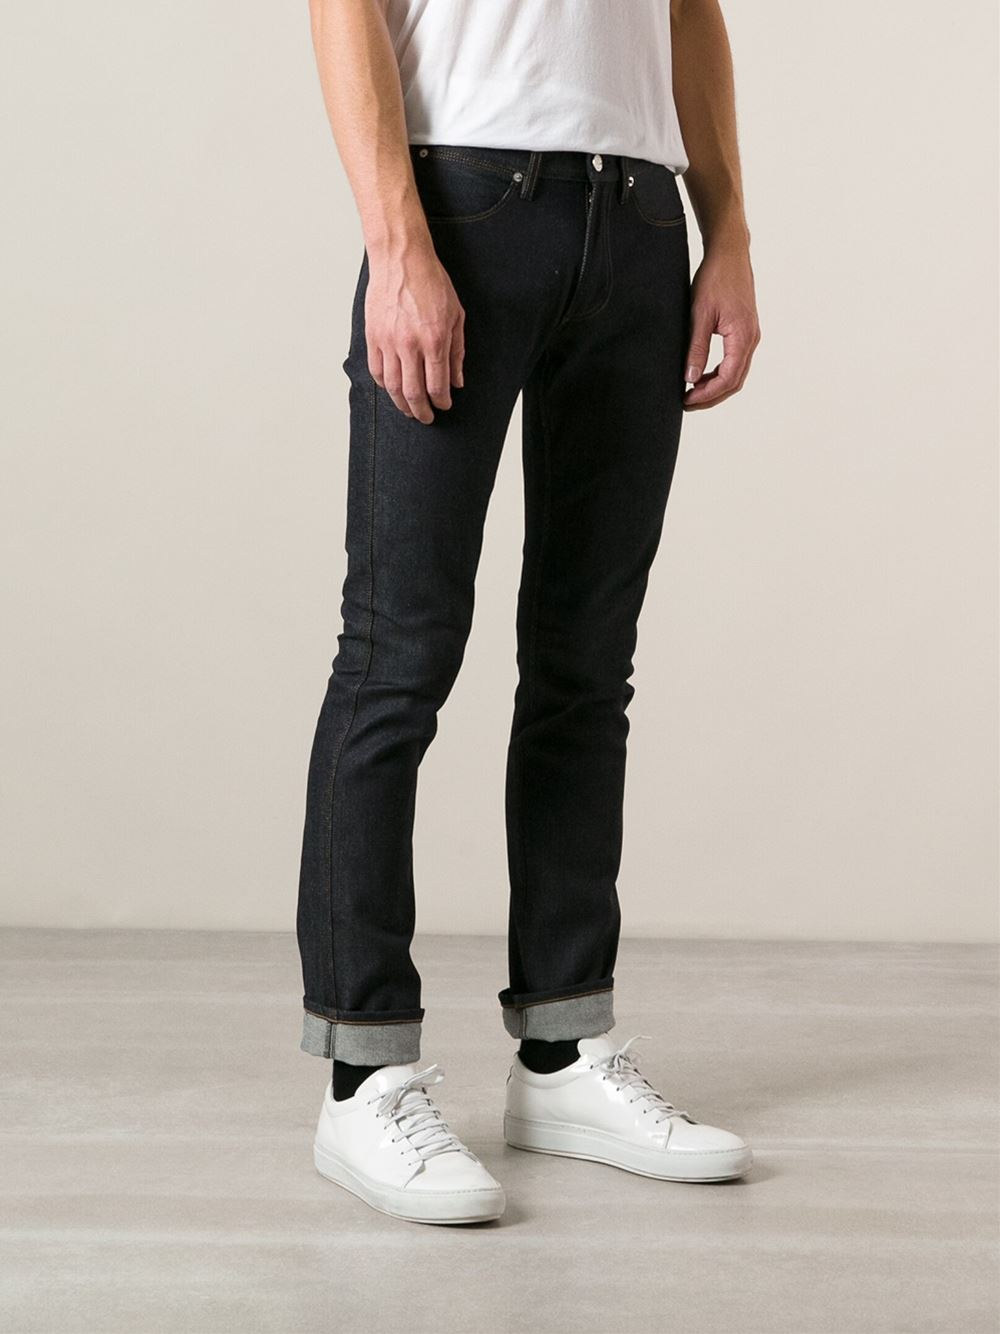 Acne Studios 'Max Raw' Jeans in Brown for Men - Lyst